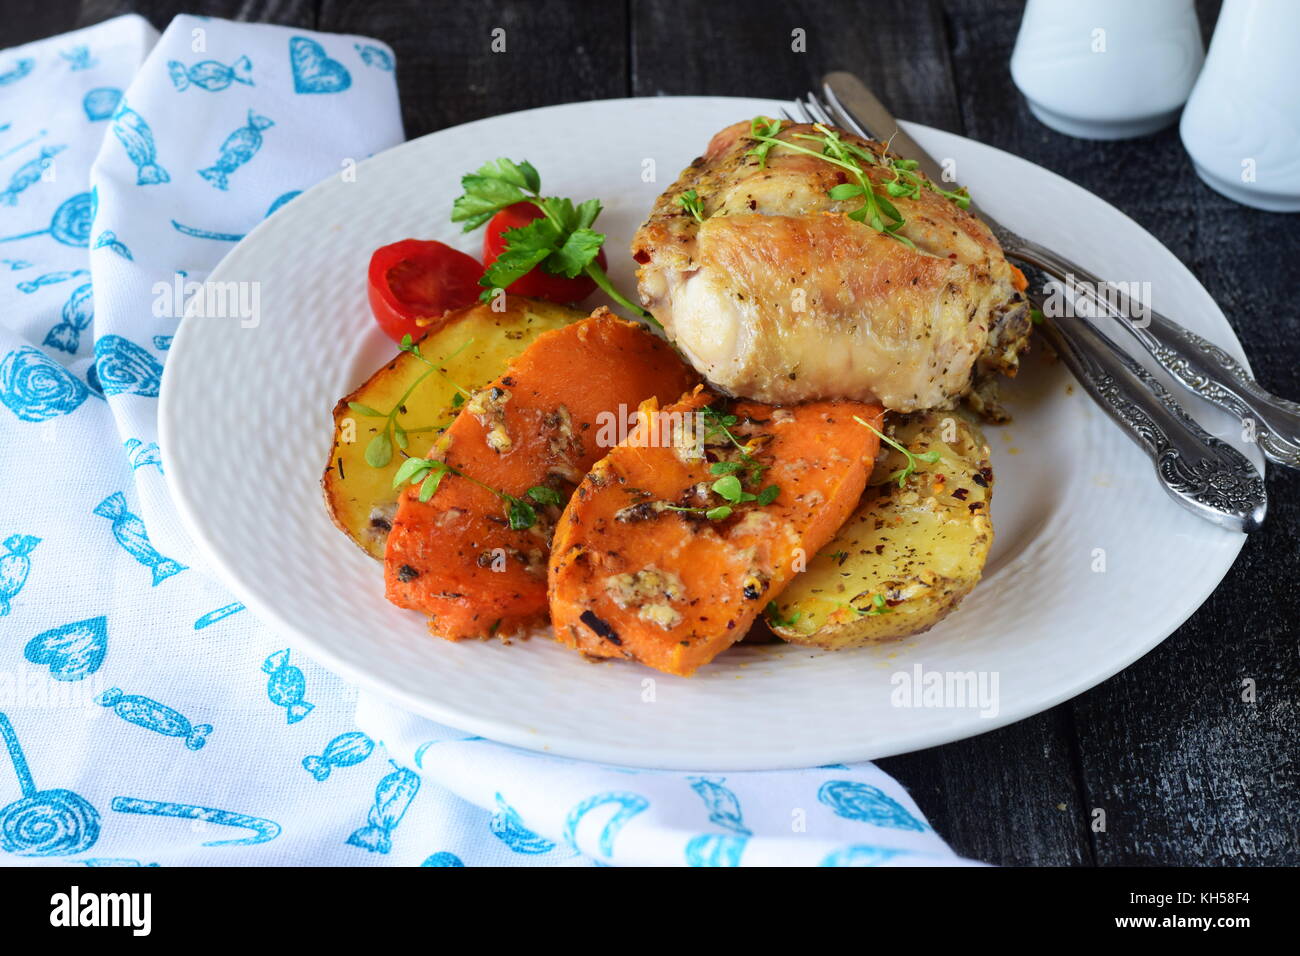 Oven cooked chicken with potato and sweet potato, spices , herbs in olive oil. Home cooking, healthy food concept Stock Photo